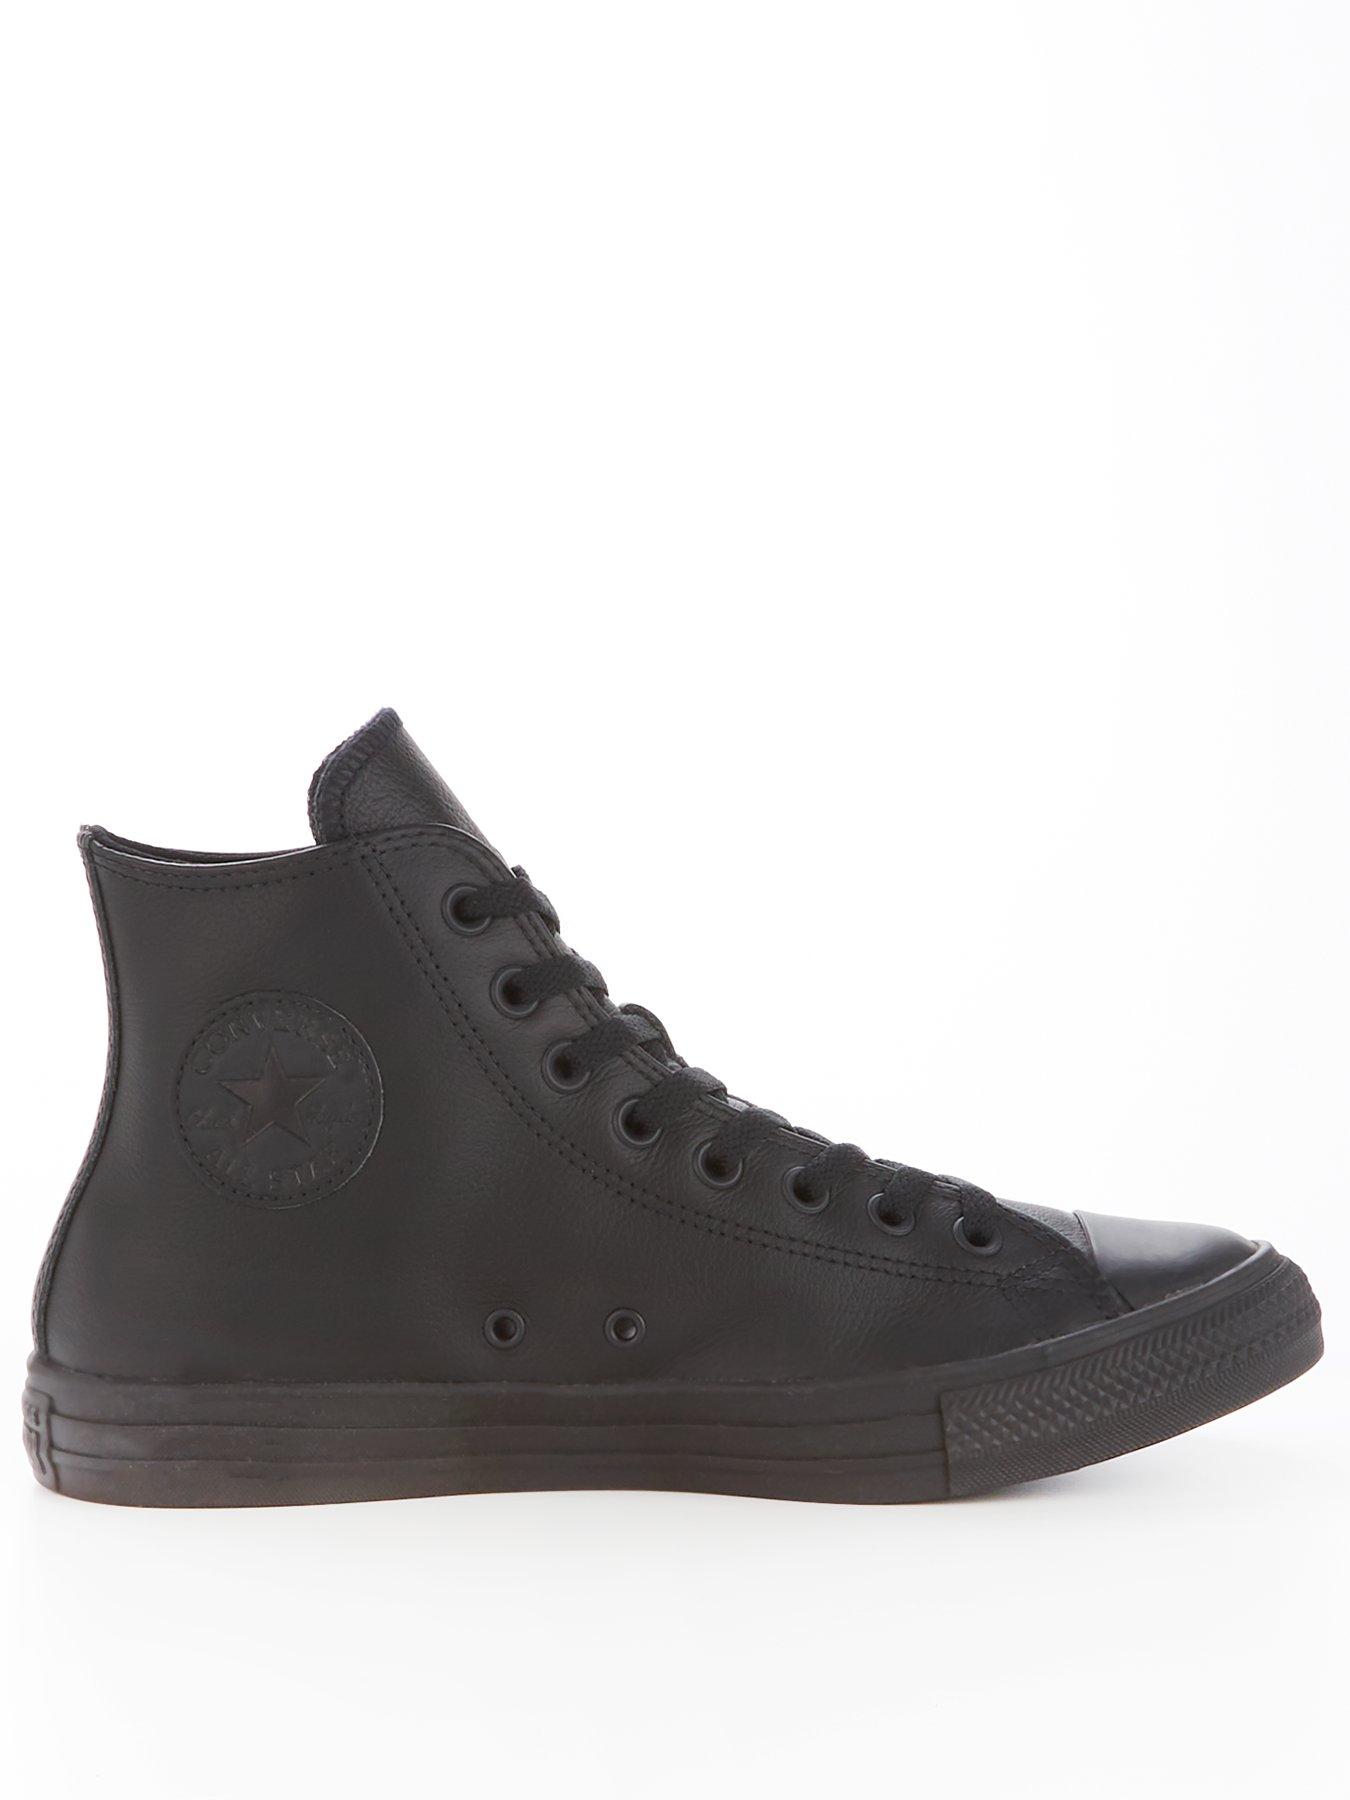 converse shoes black leather high tops